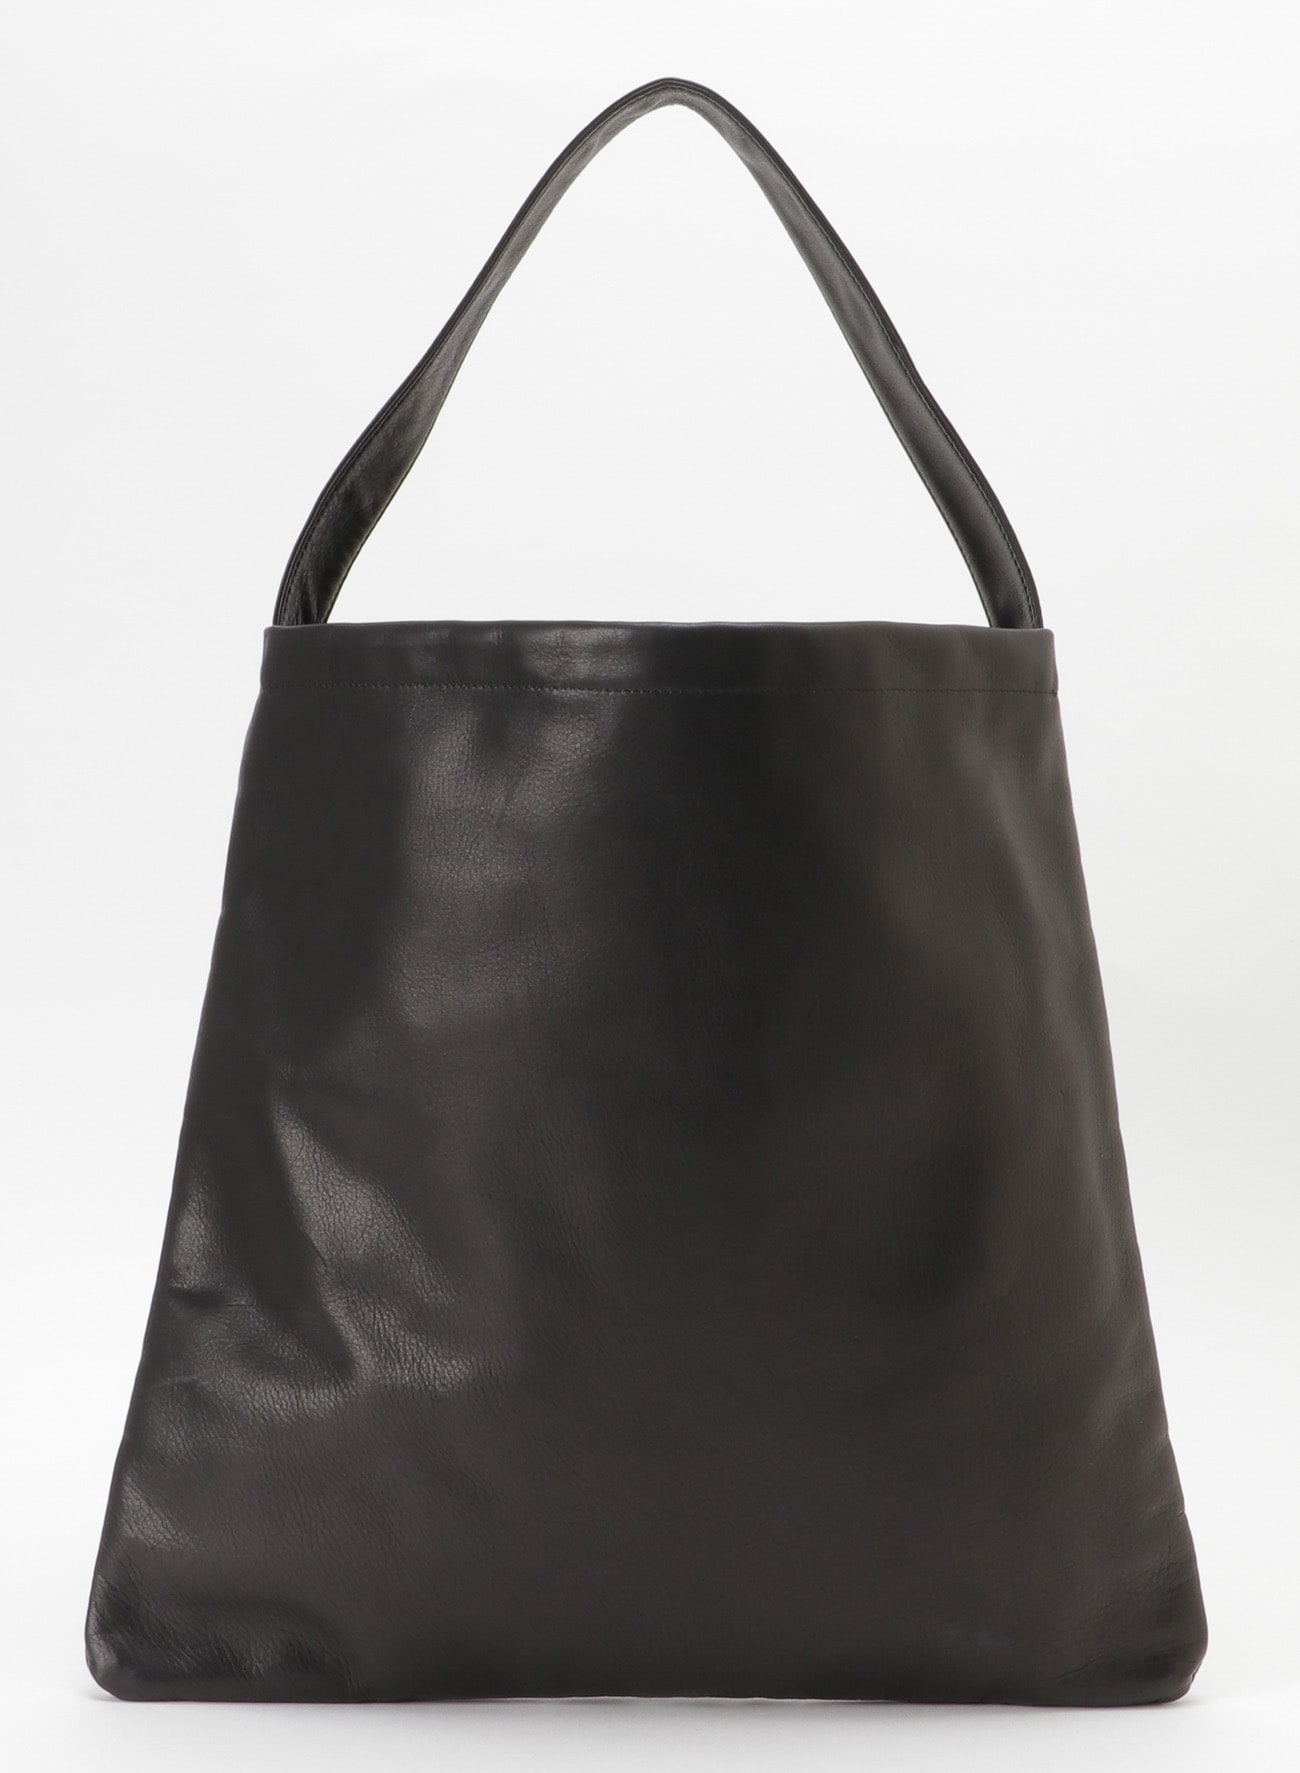 SOFT SMOOTH LEATHER FLAT TOTE BAG